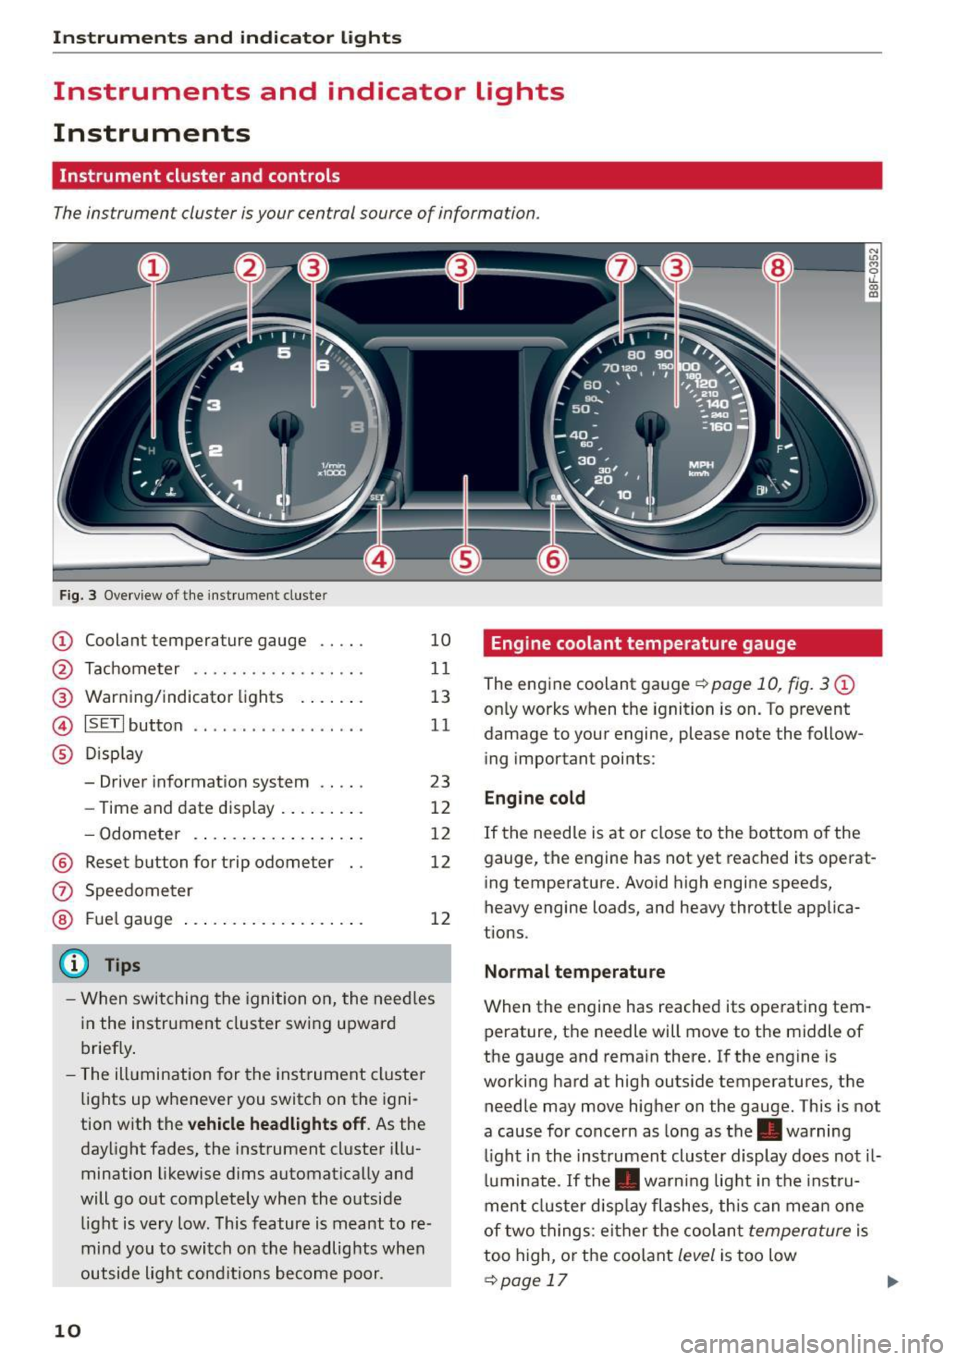 AUDI A5 CABRIOLET 2015  Owners Manual Instruments  and  indicator  Lights 
Instruments  and  indicator  Lights 
Instruments 
Instrument  cluster  and  controls 
The instrument  cluster  is your  central source  of  information. 
Fig.  3  